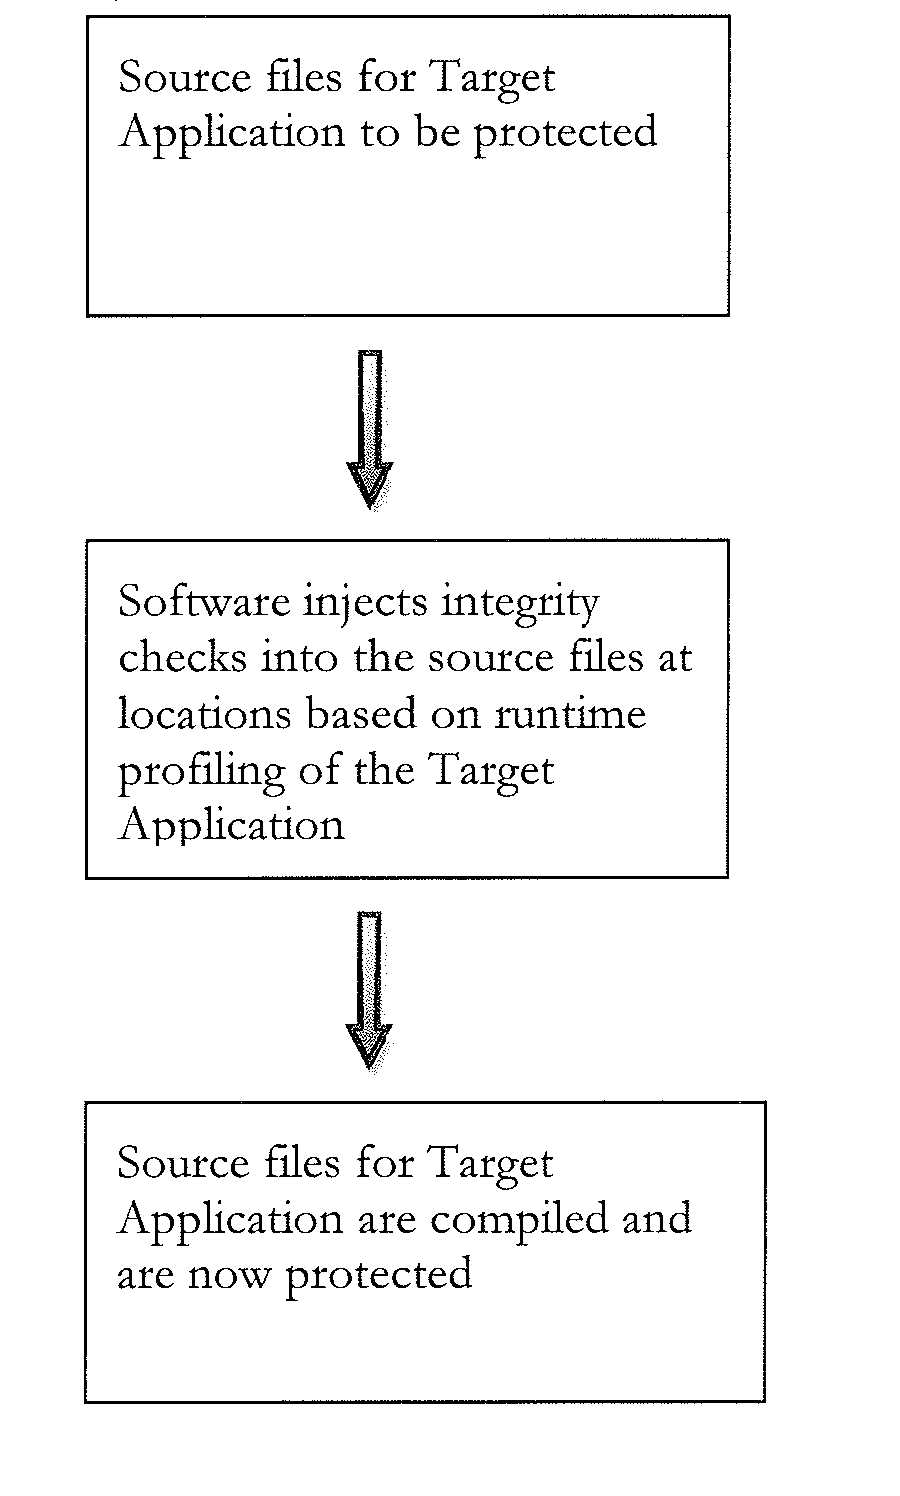 Anti-Tamper System Employing Automated Analysis